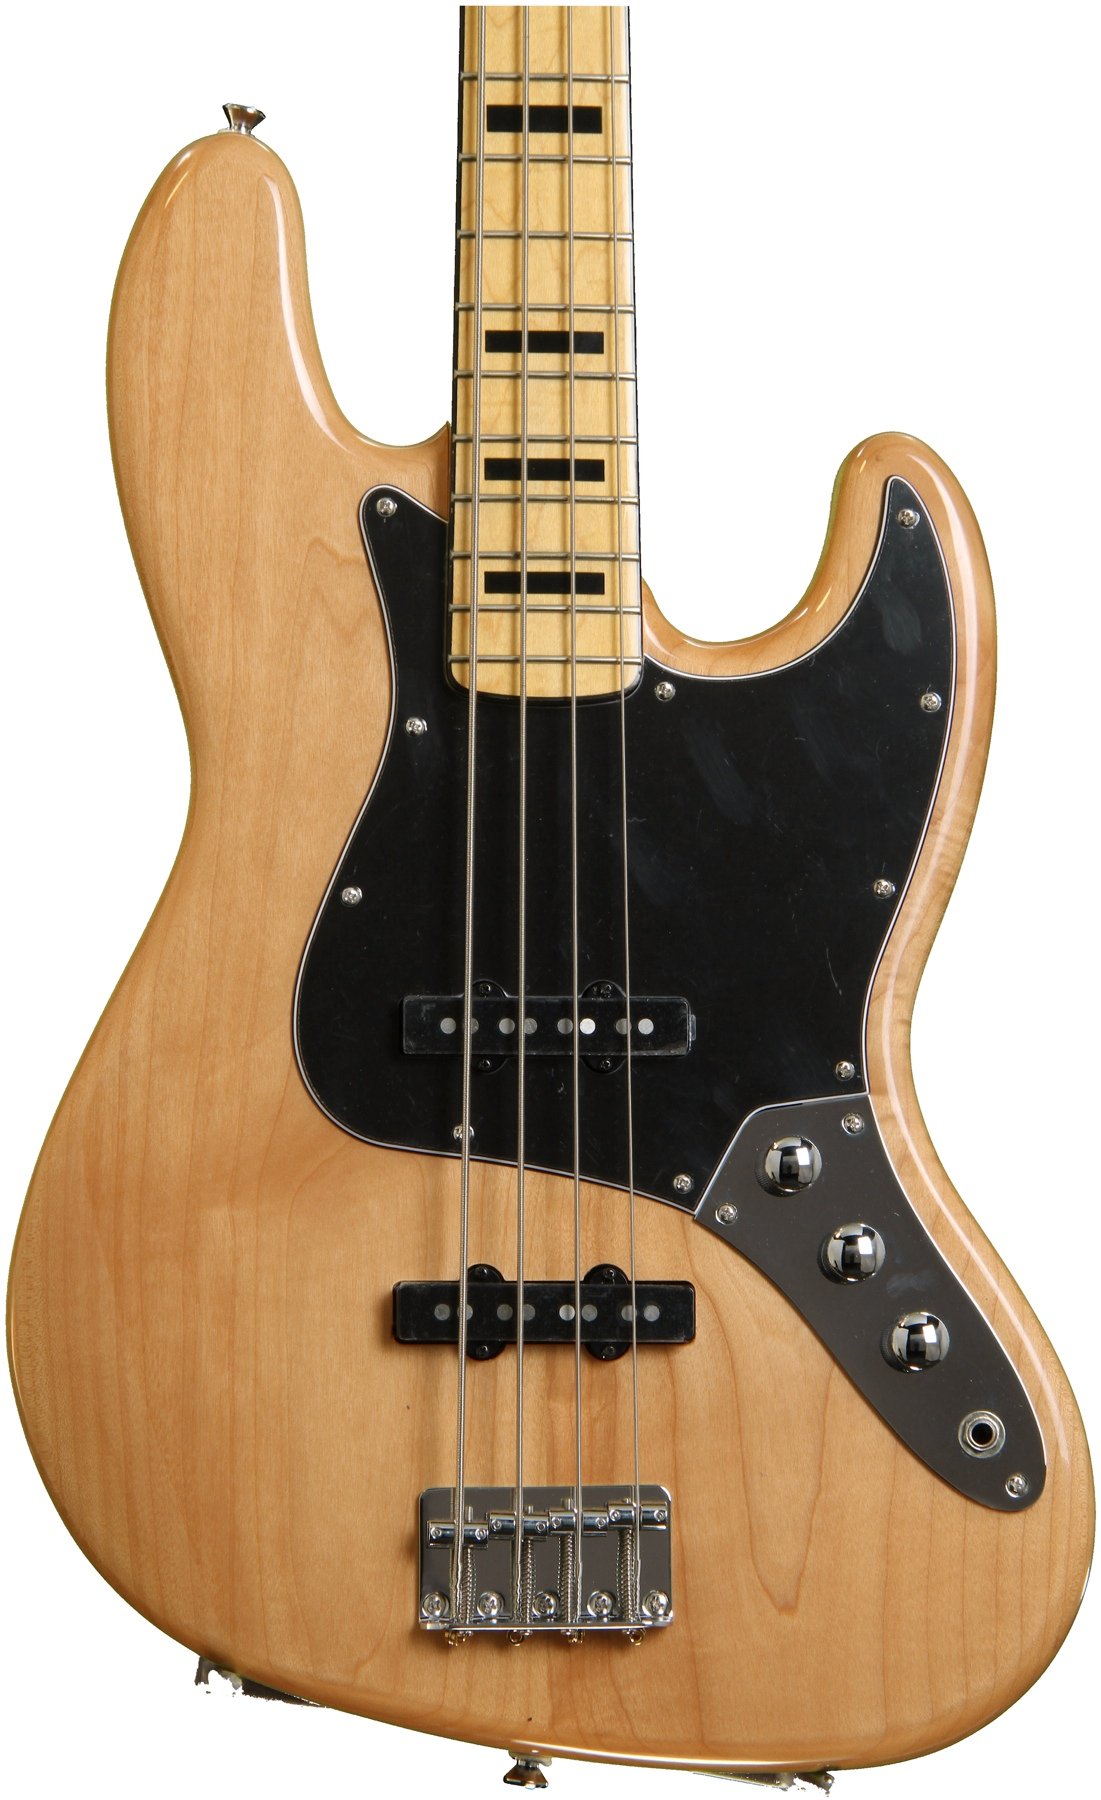 Squier Vintage Modified Jazz Bass '70s - Natural | Sweetwater